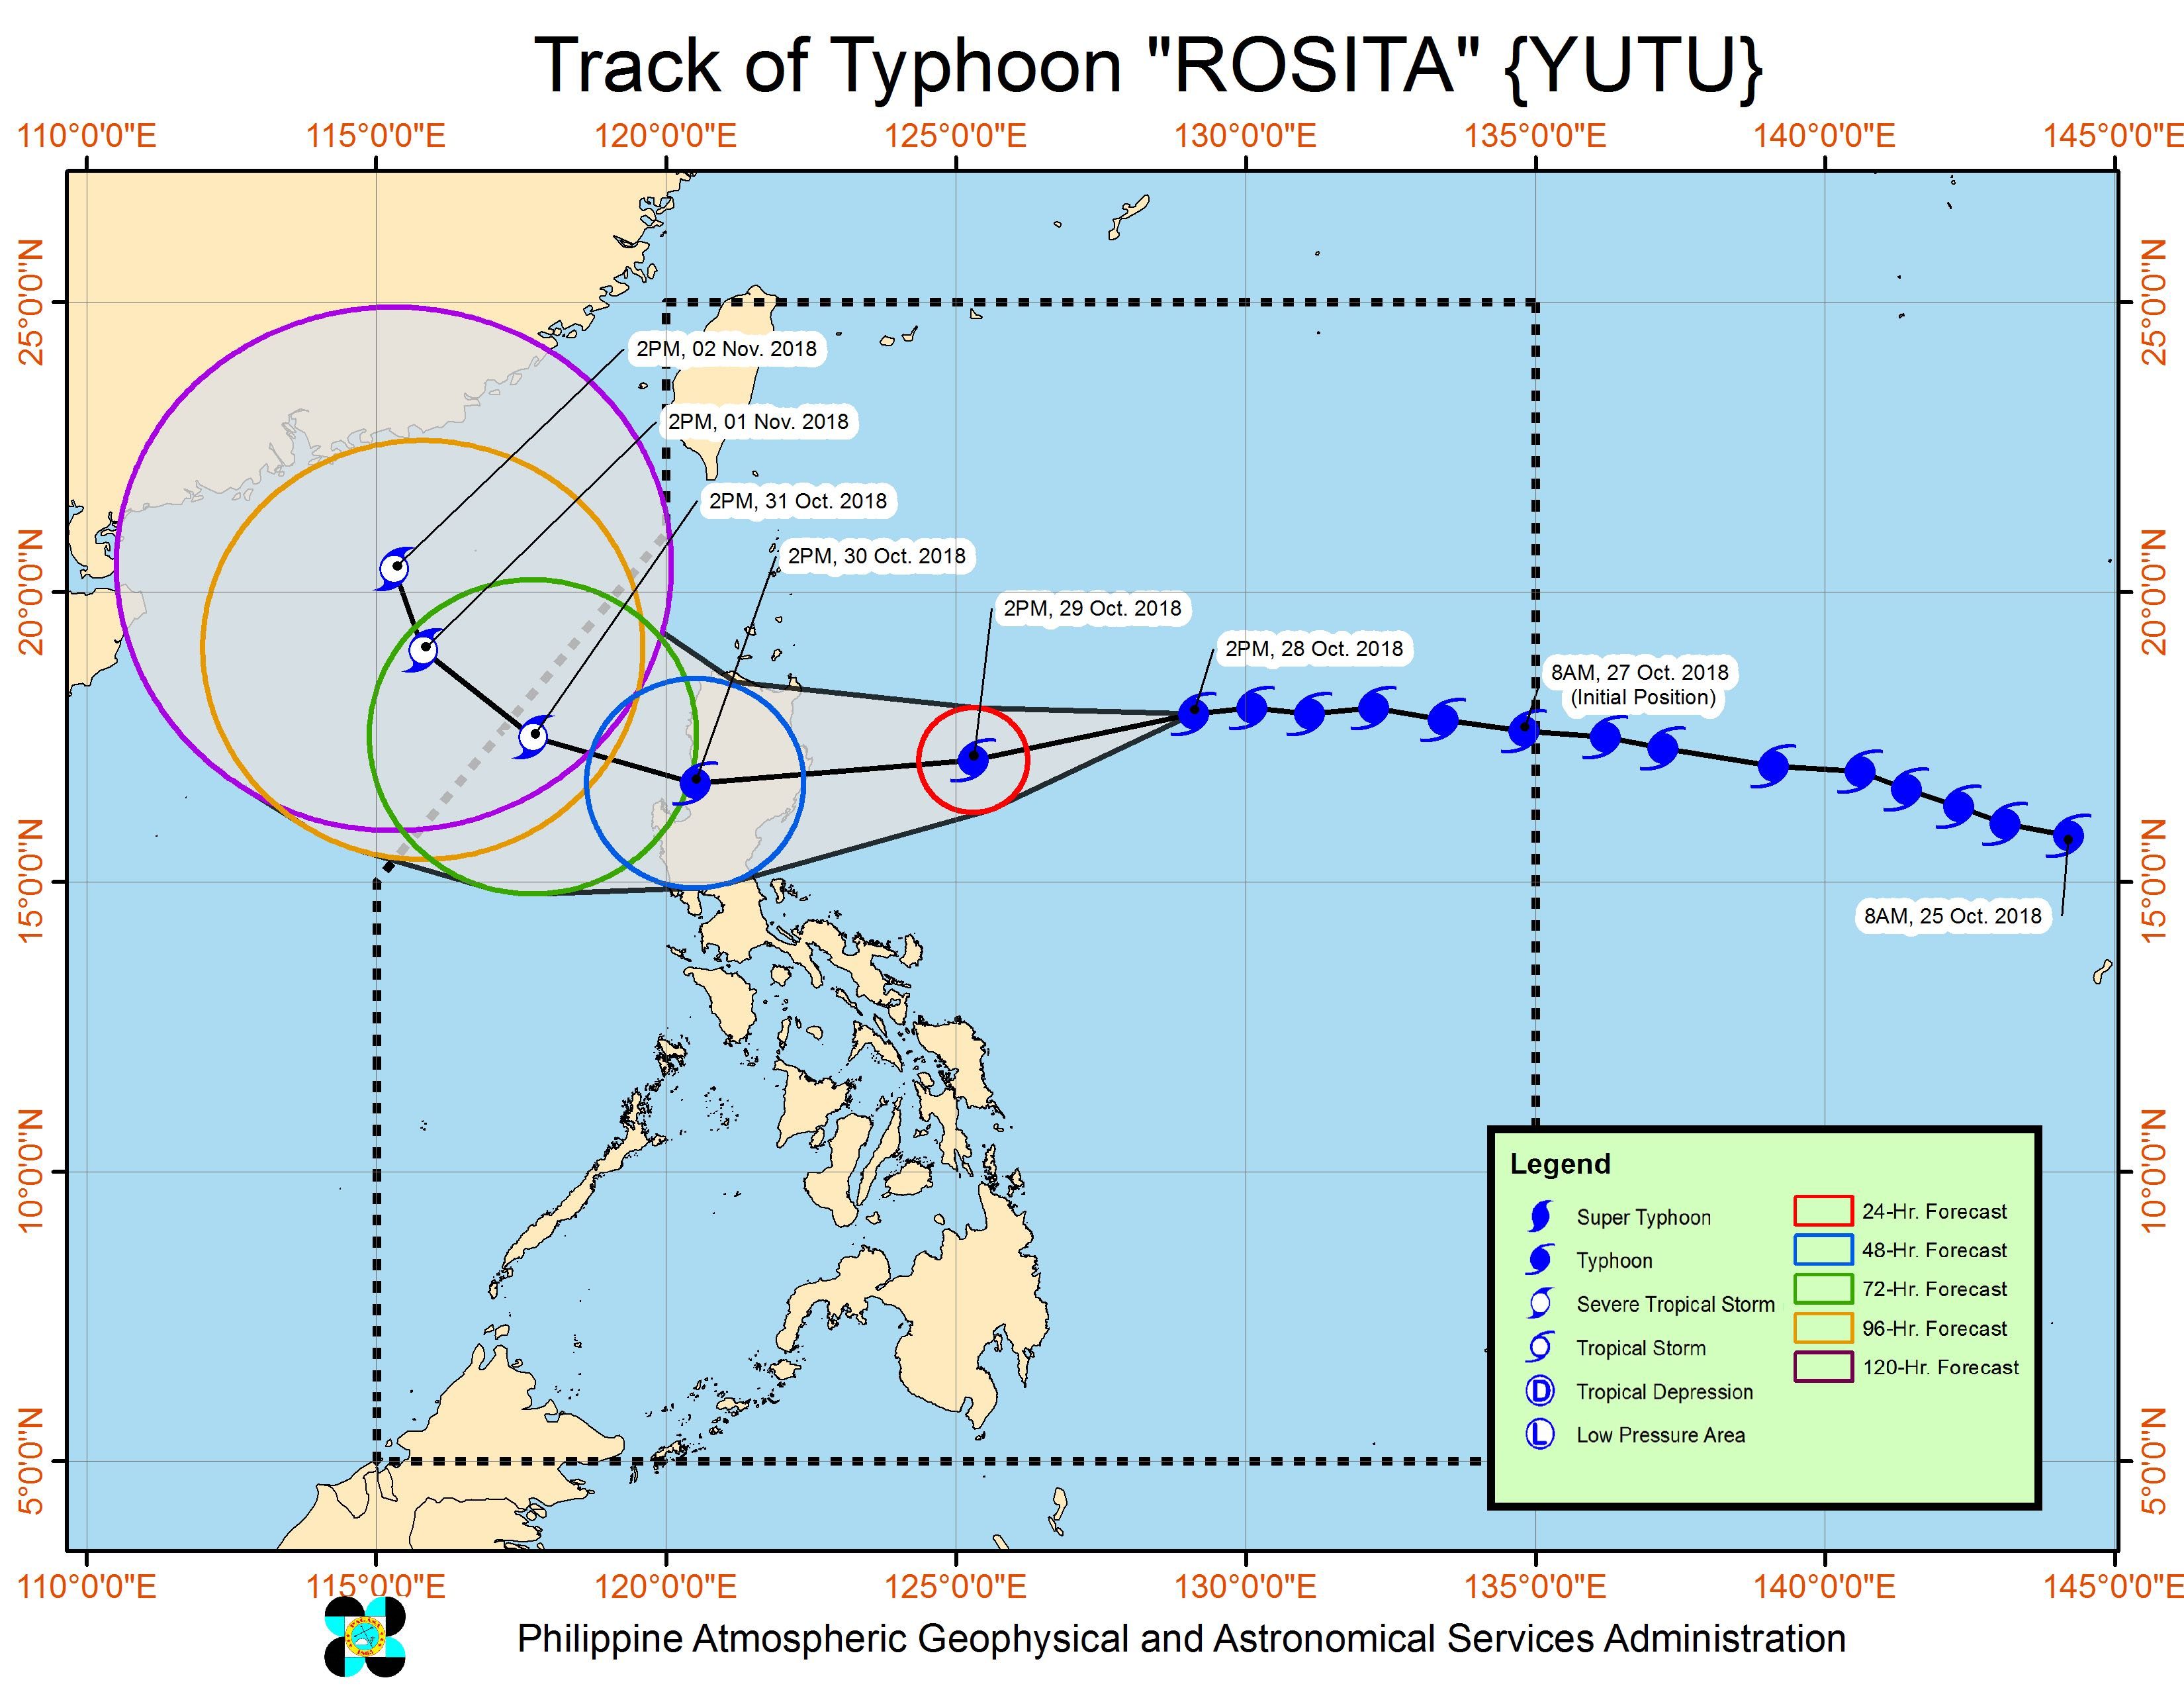 Forecast track of Typhoon Rosita (Yutu) as of October 28, 2018, 5 pm. Image from PAGASA 